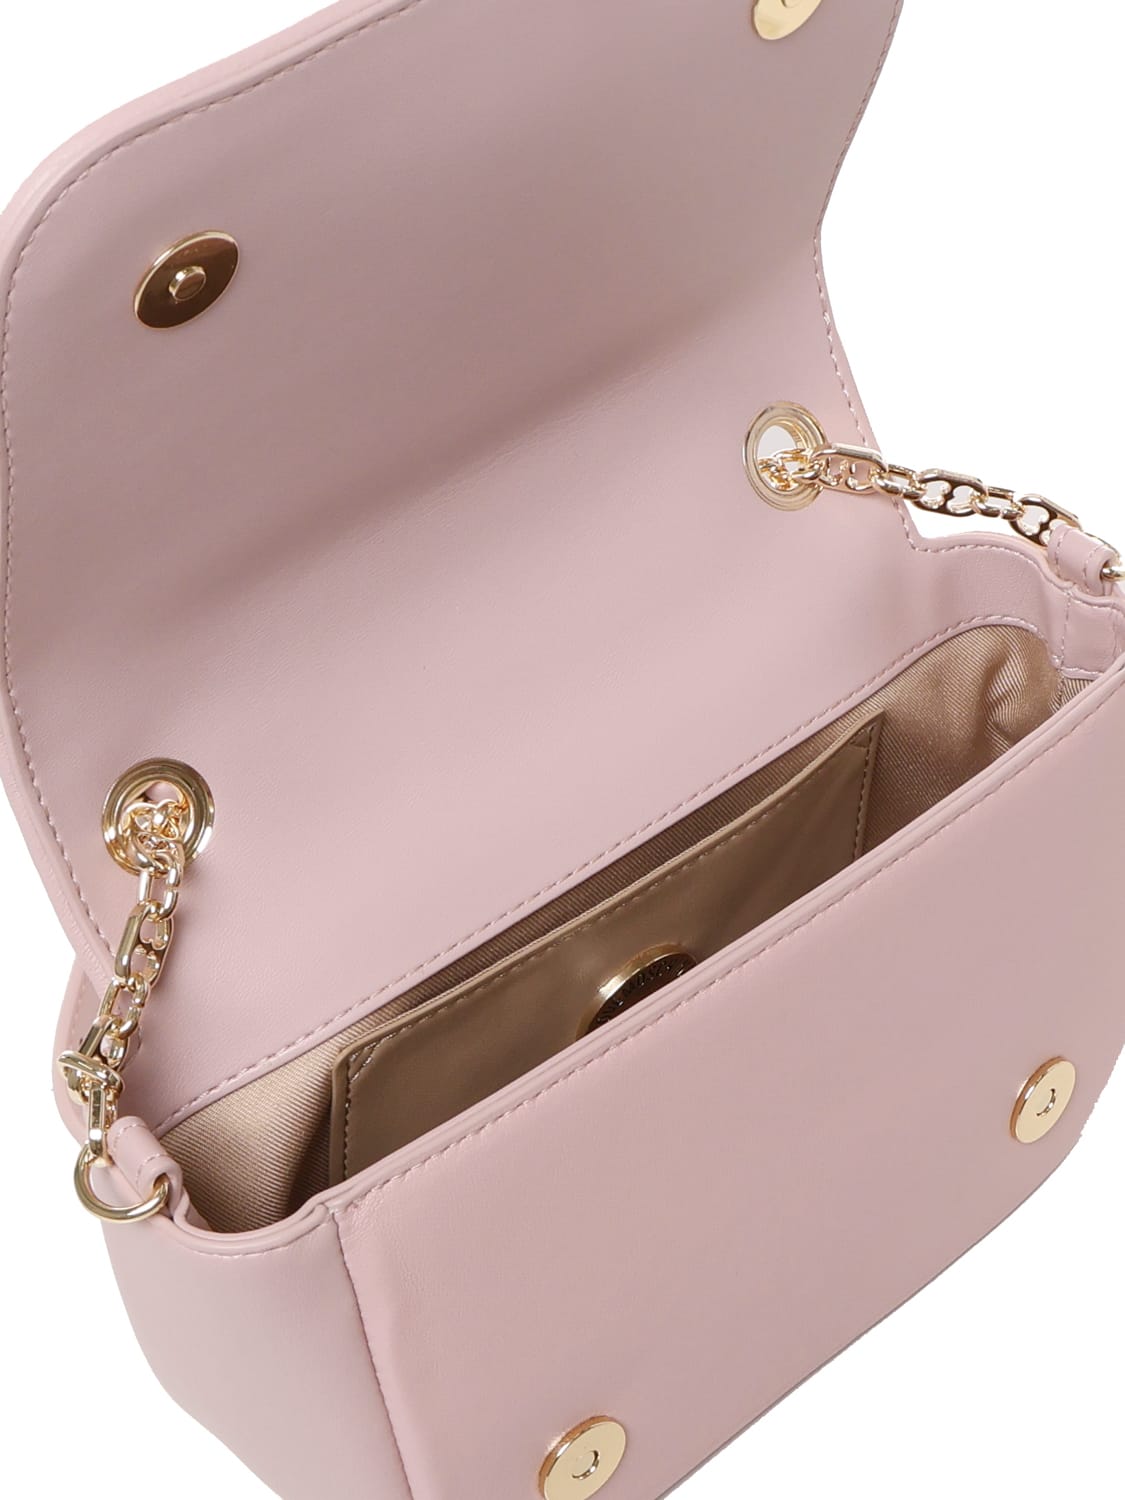 Shop Love Moschino Shoulder Bag In Ecoleather In Powder Pink